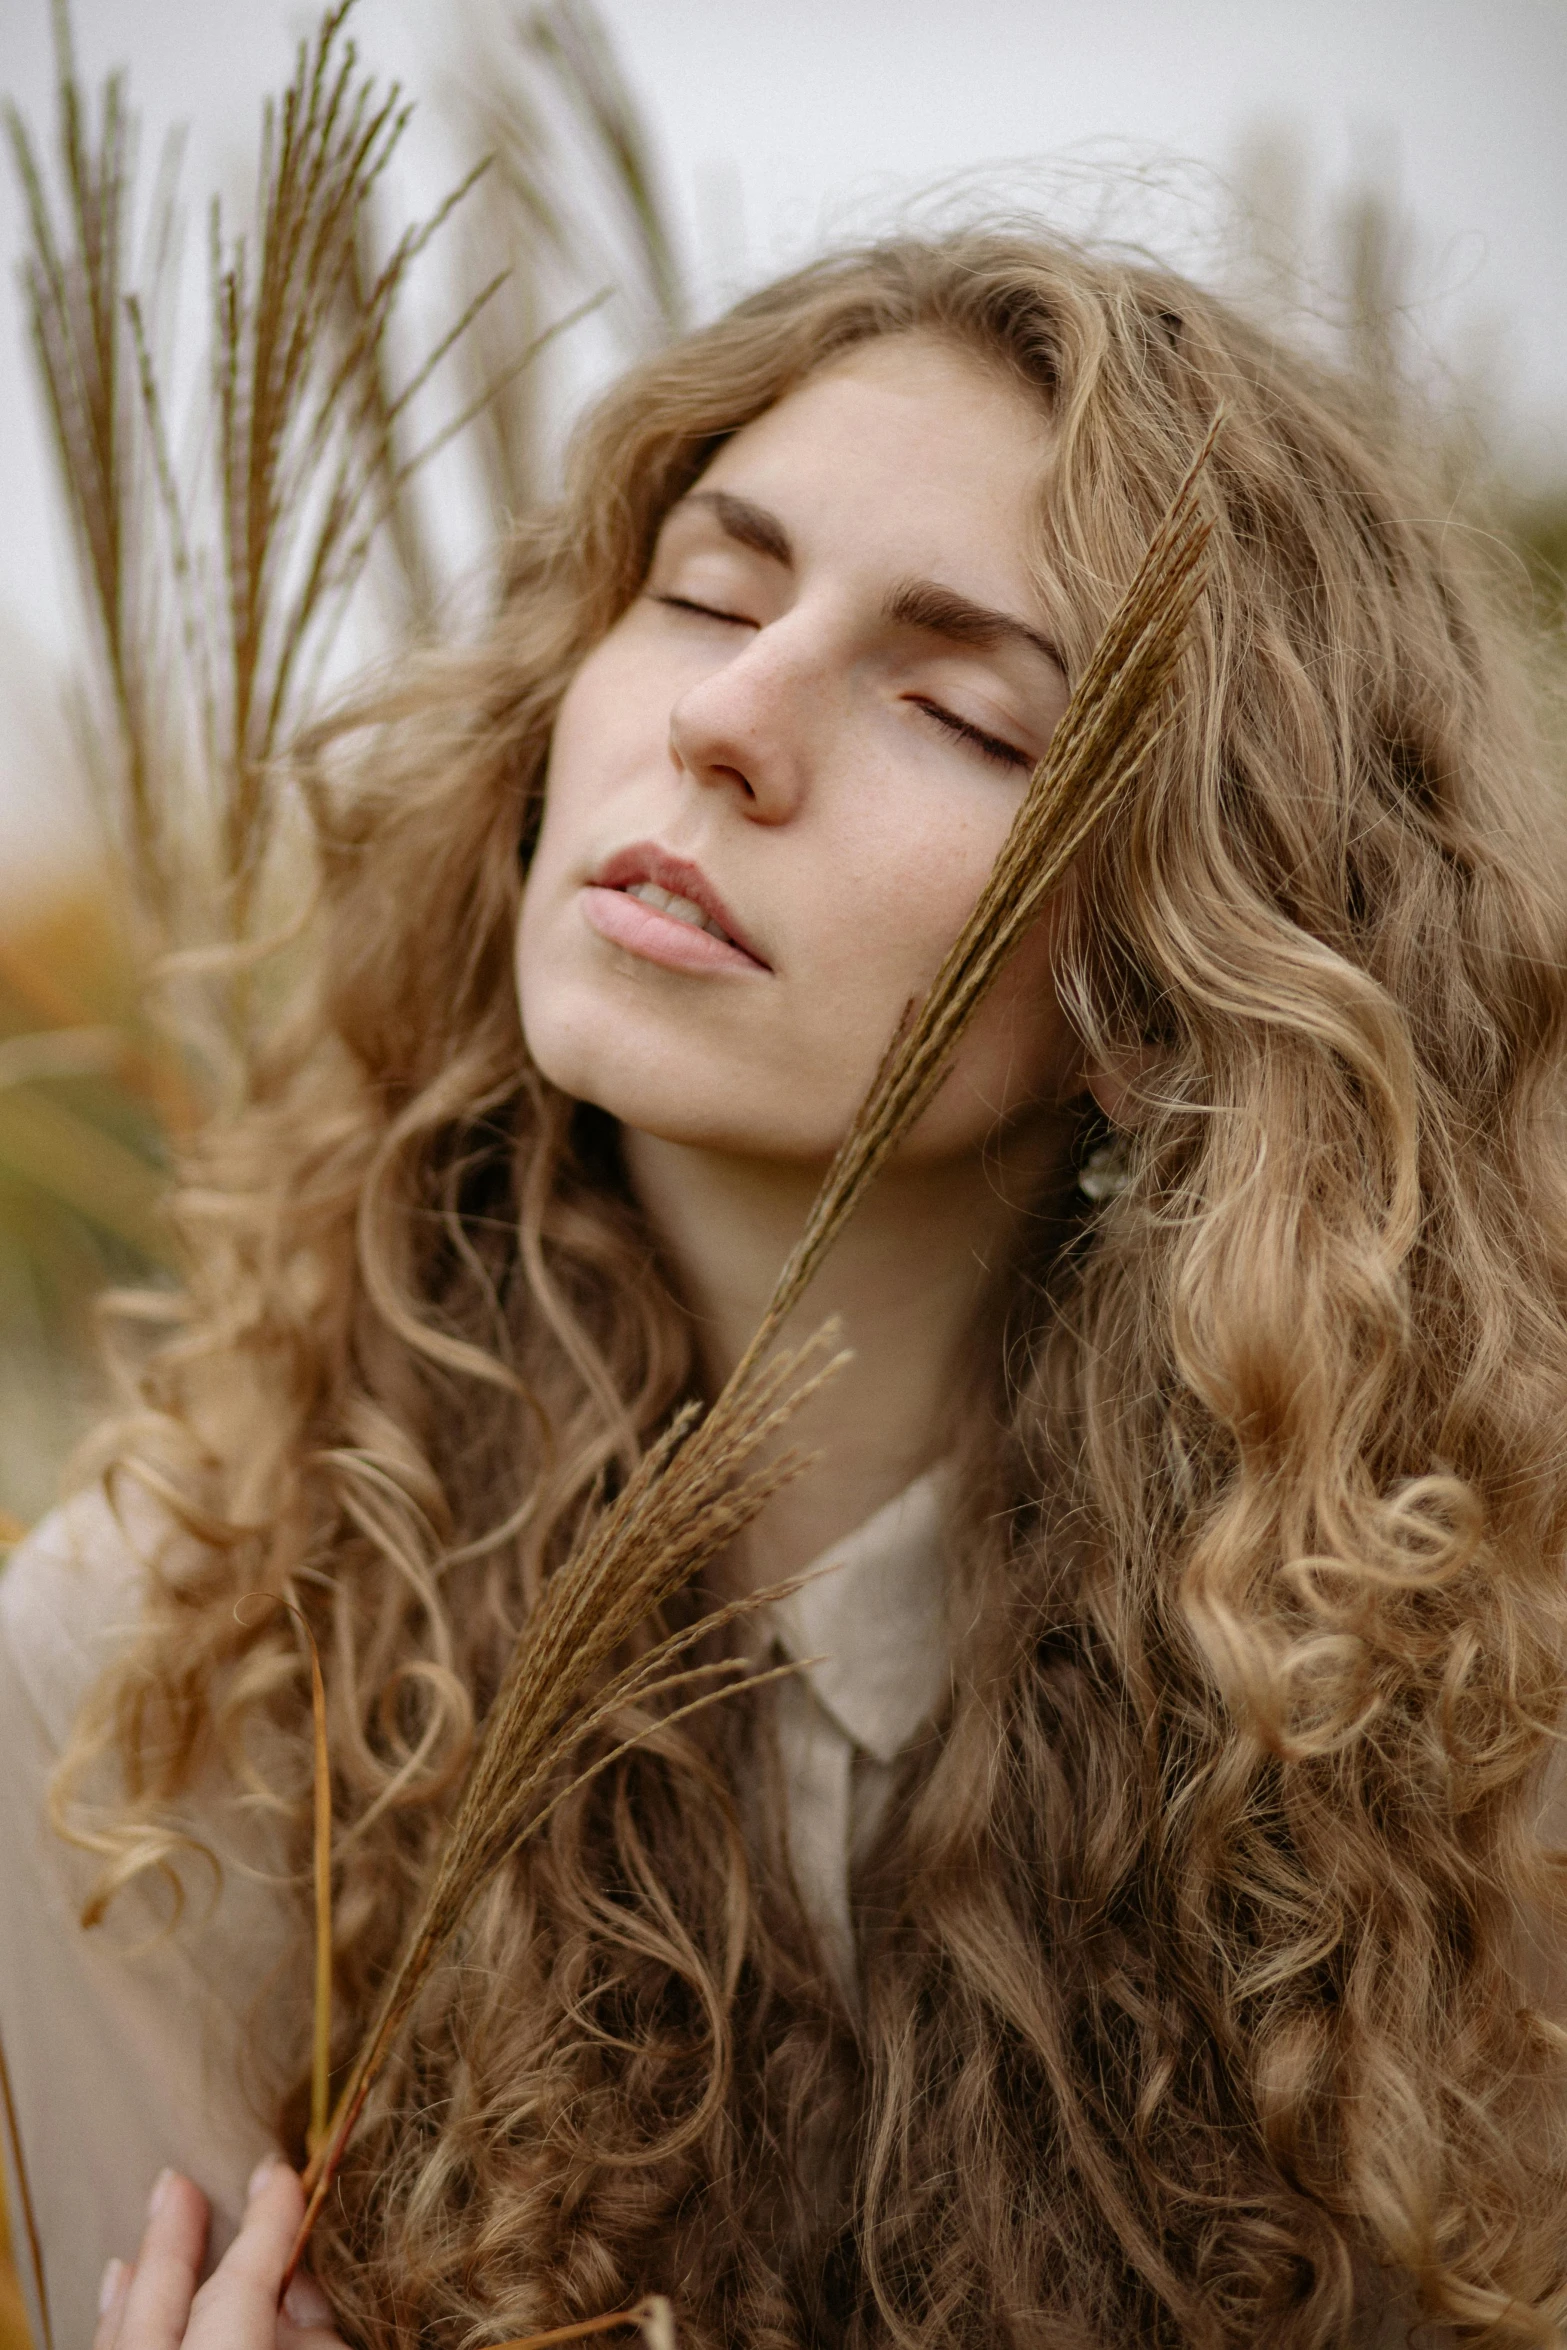 a woman with long curly hair standing in a field, trending on pexels, sleepy fashion model face, close-up photograph, half image, light borwn hair